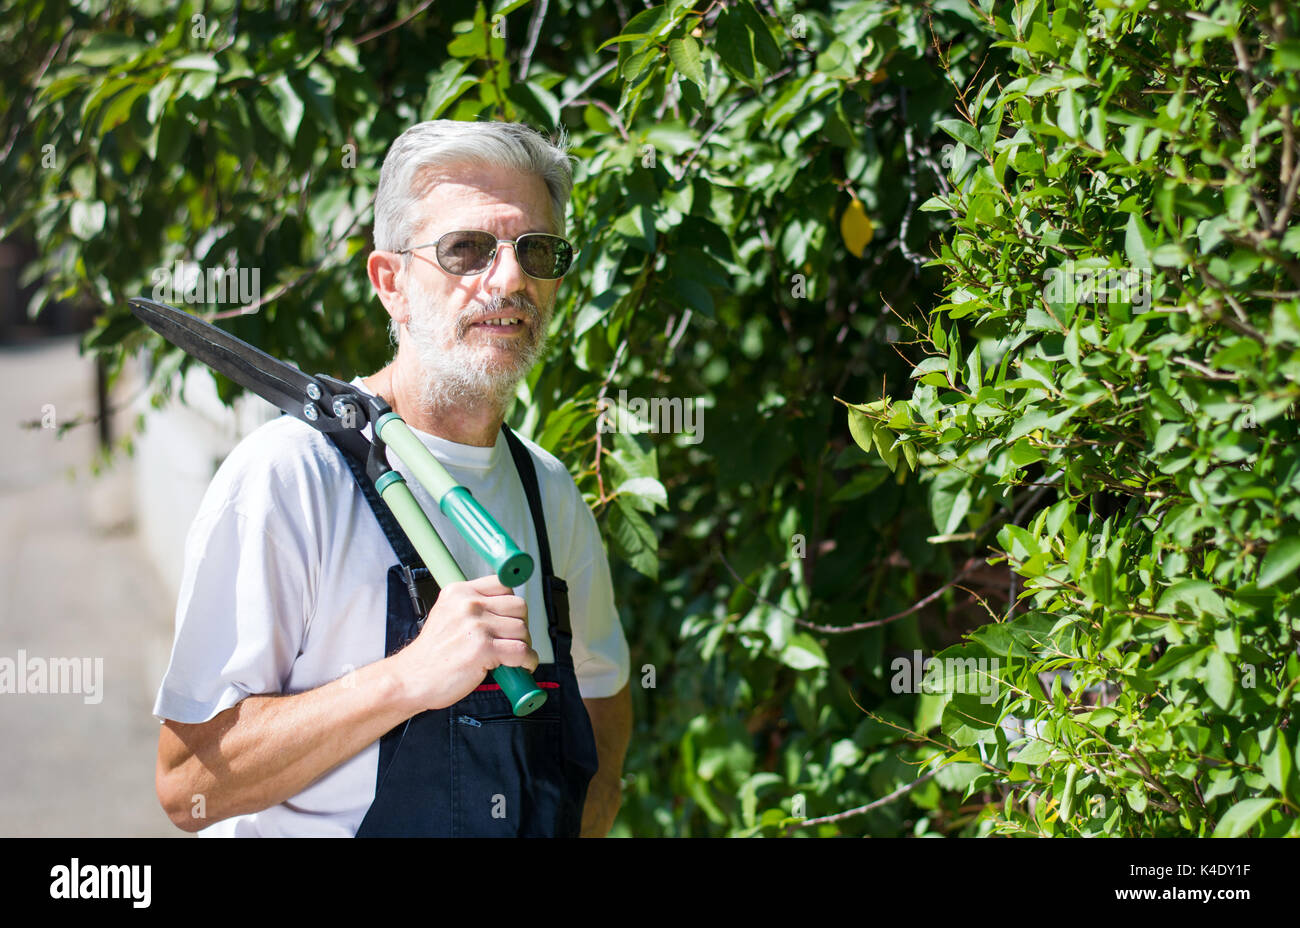 Gardener  trimming hedgerow with gardening scissors on a sunny day Stock Photo